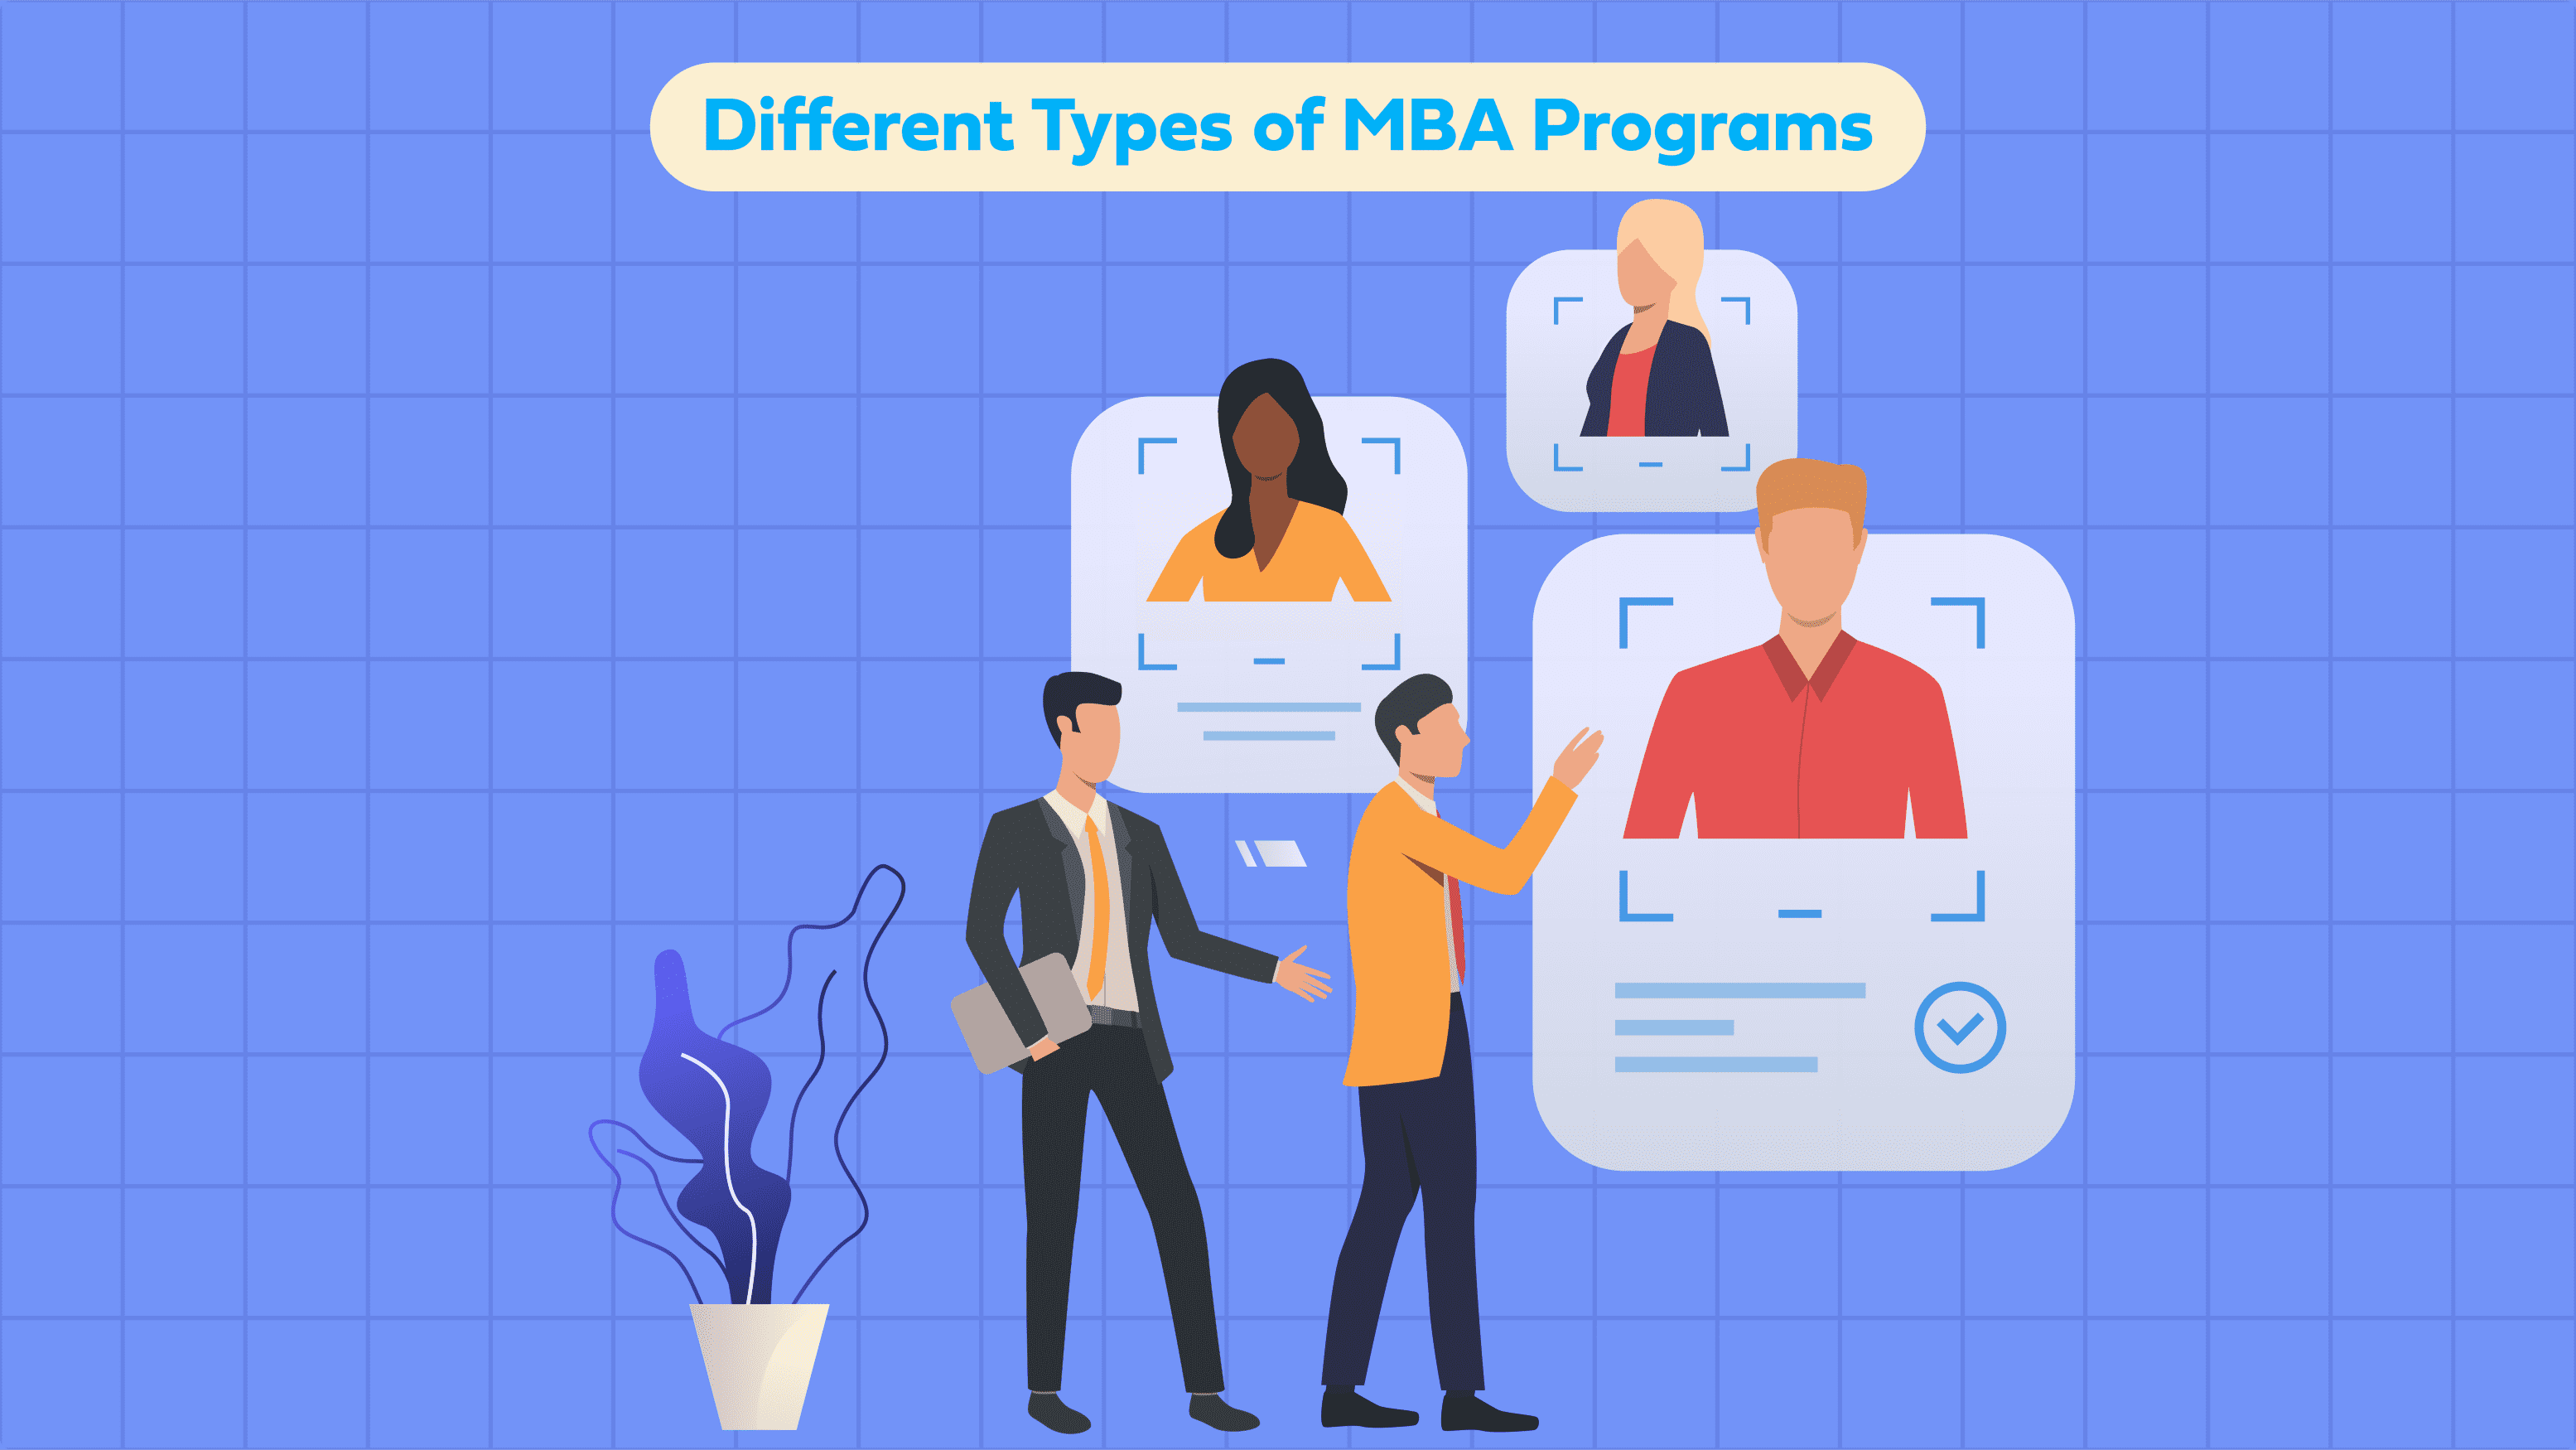 Different Types of MBA Programs